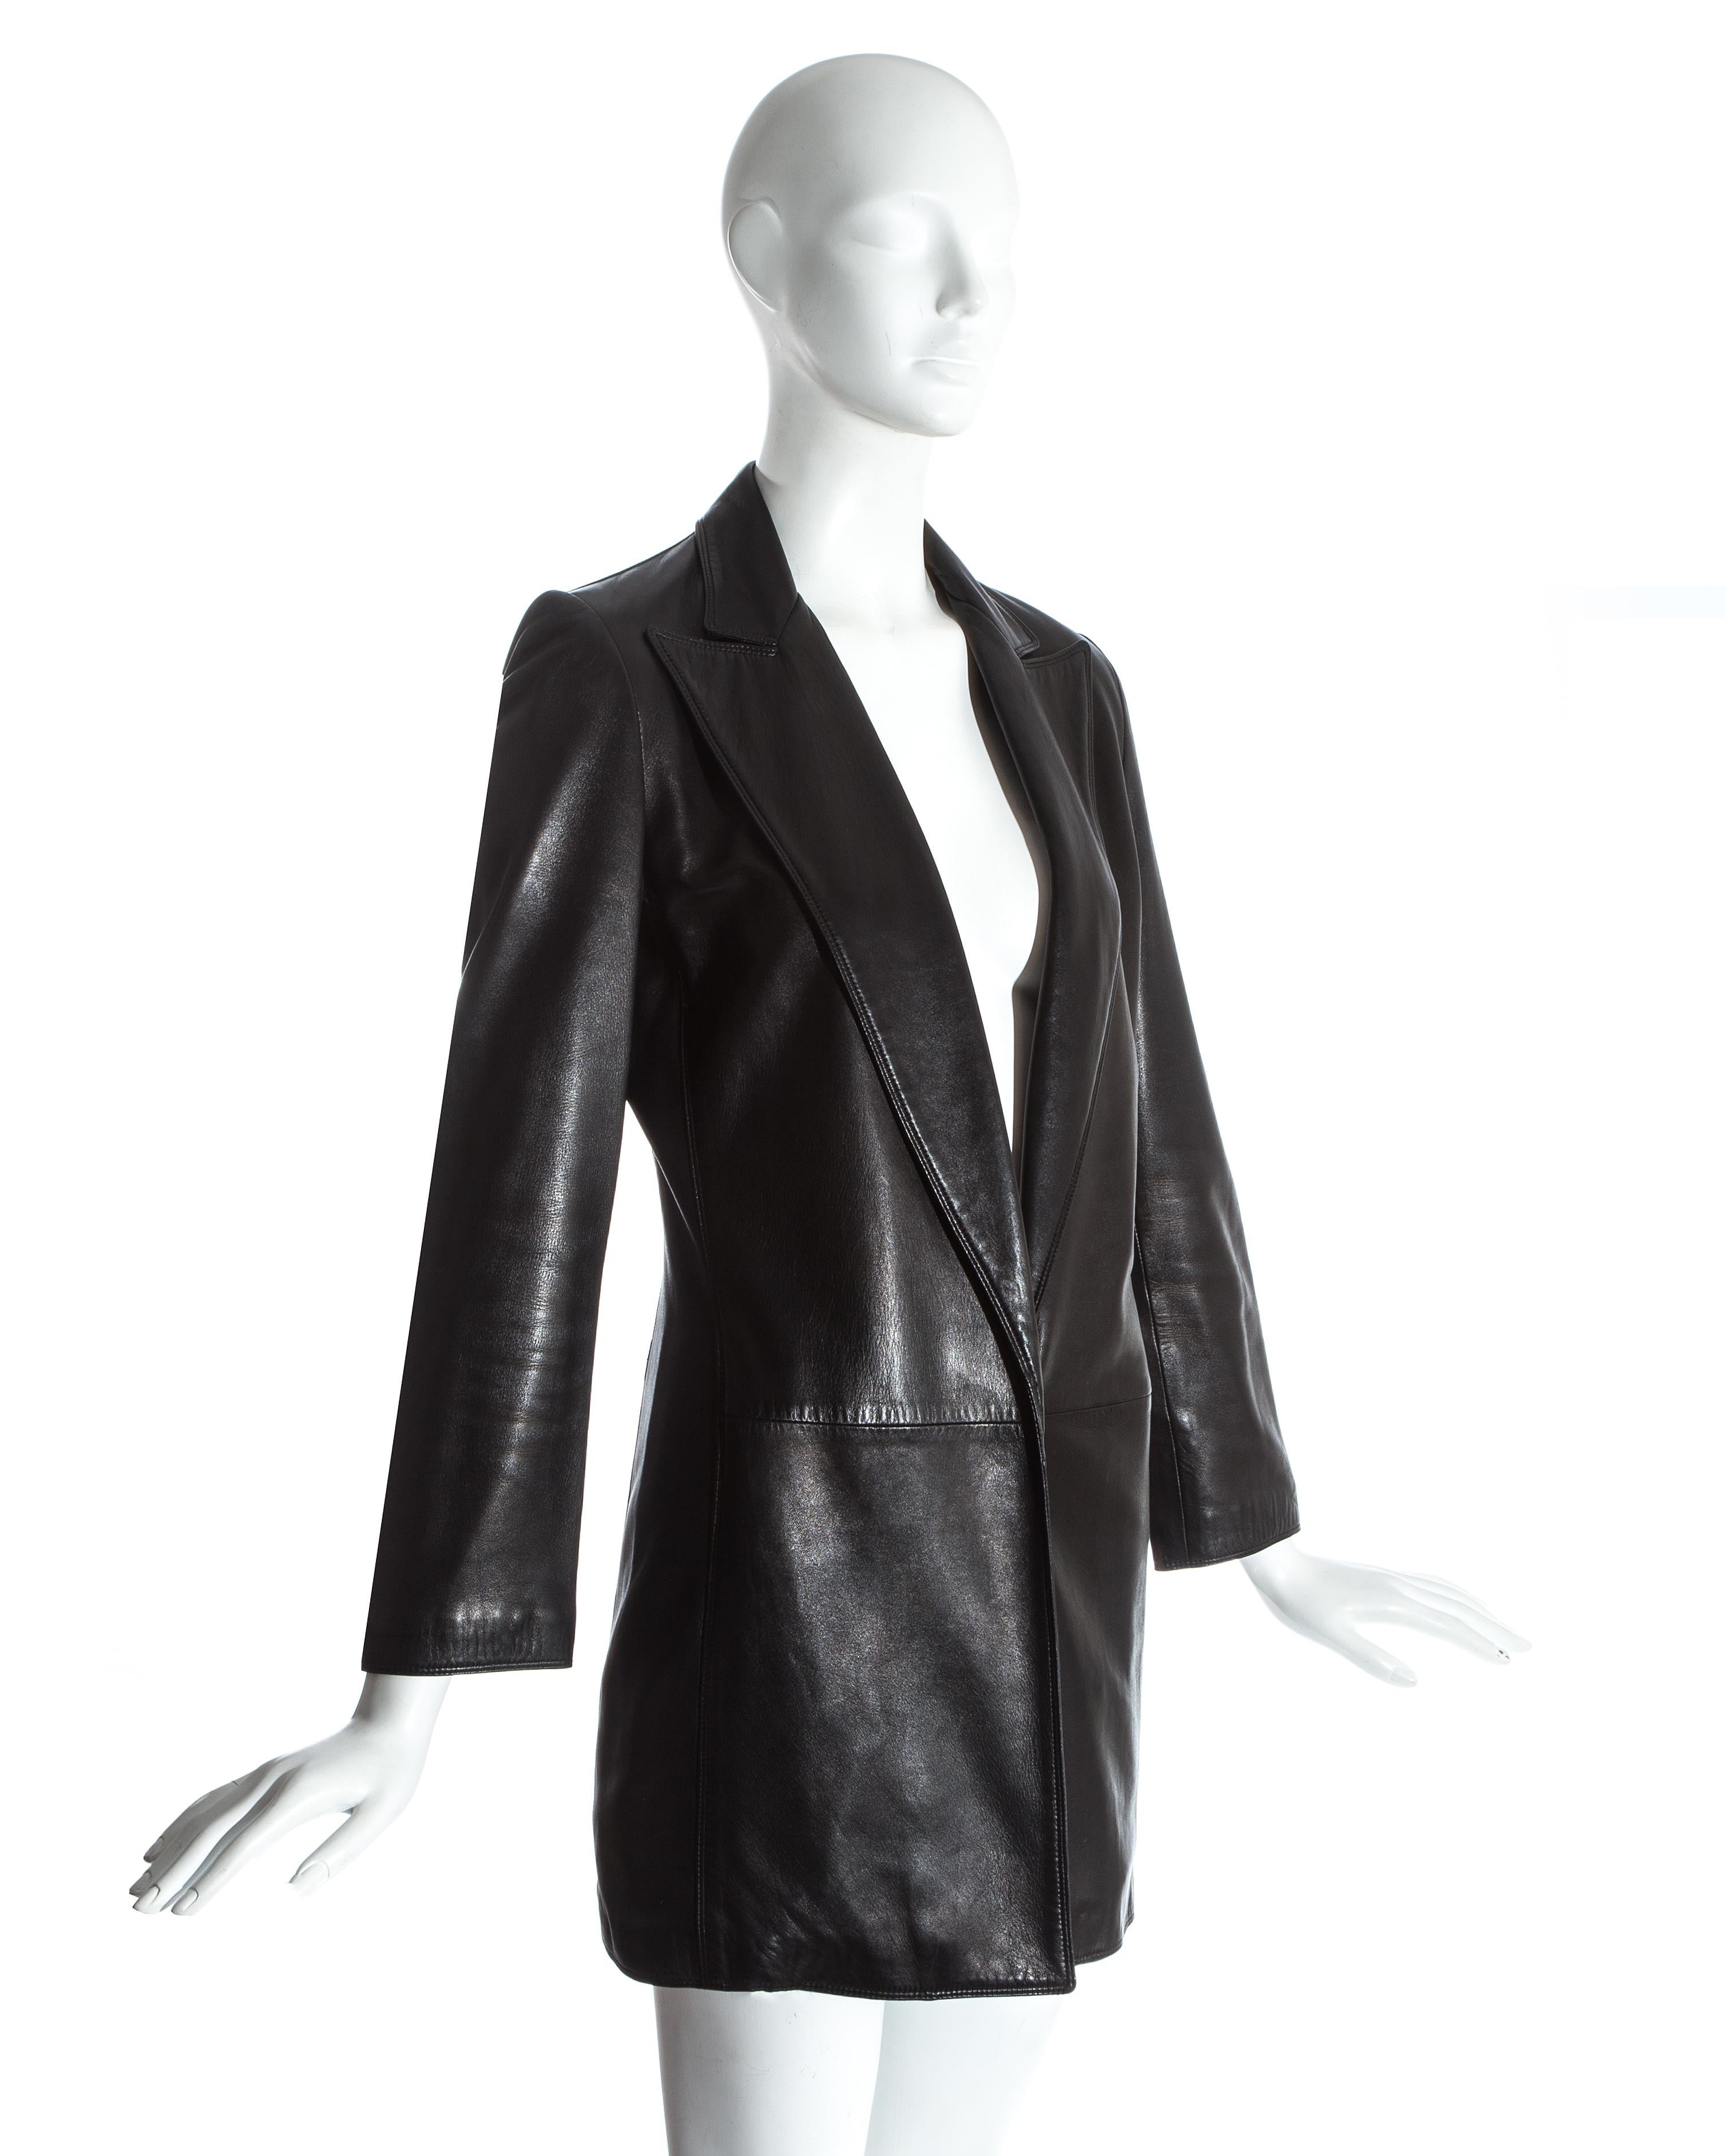 Black Gianni Versace black lambskin leather blazer jacket and skirt suit, fw 1997 For Sale